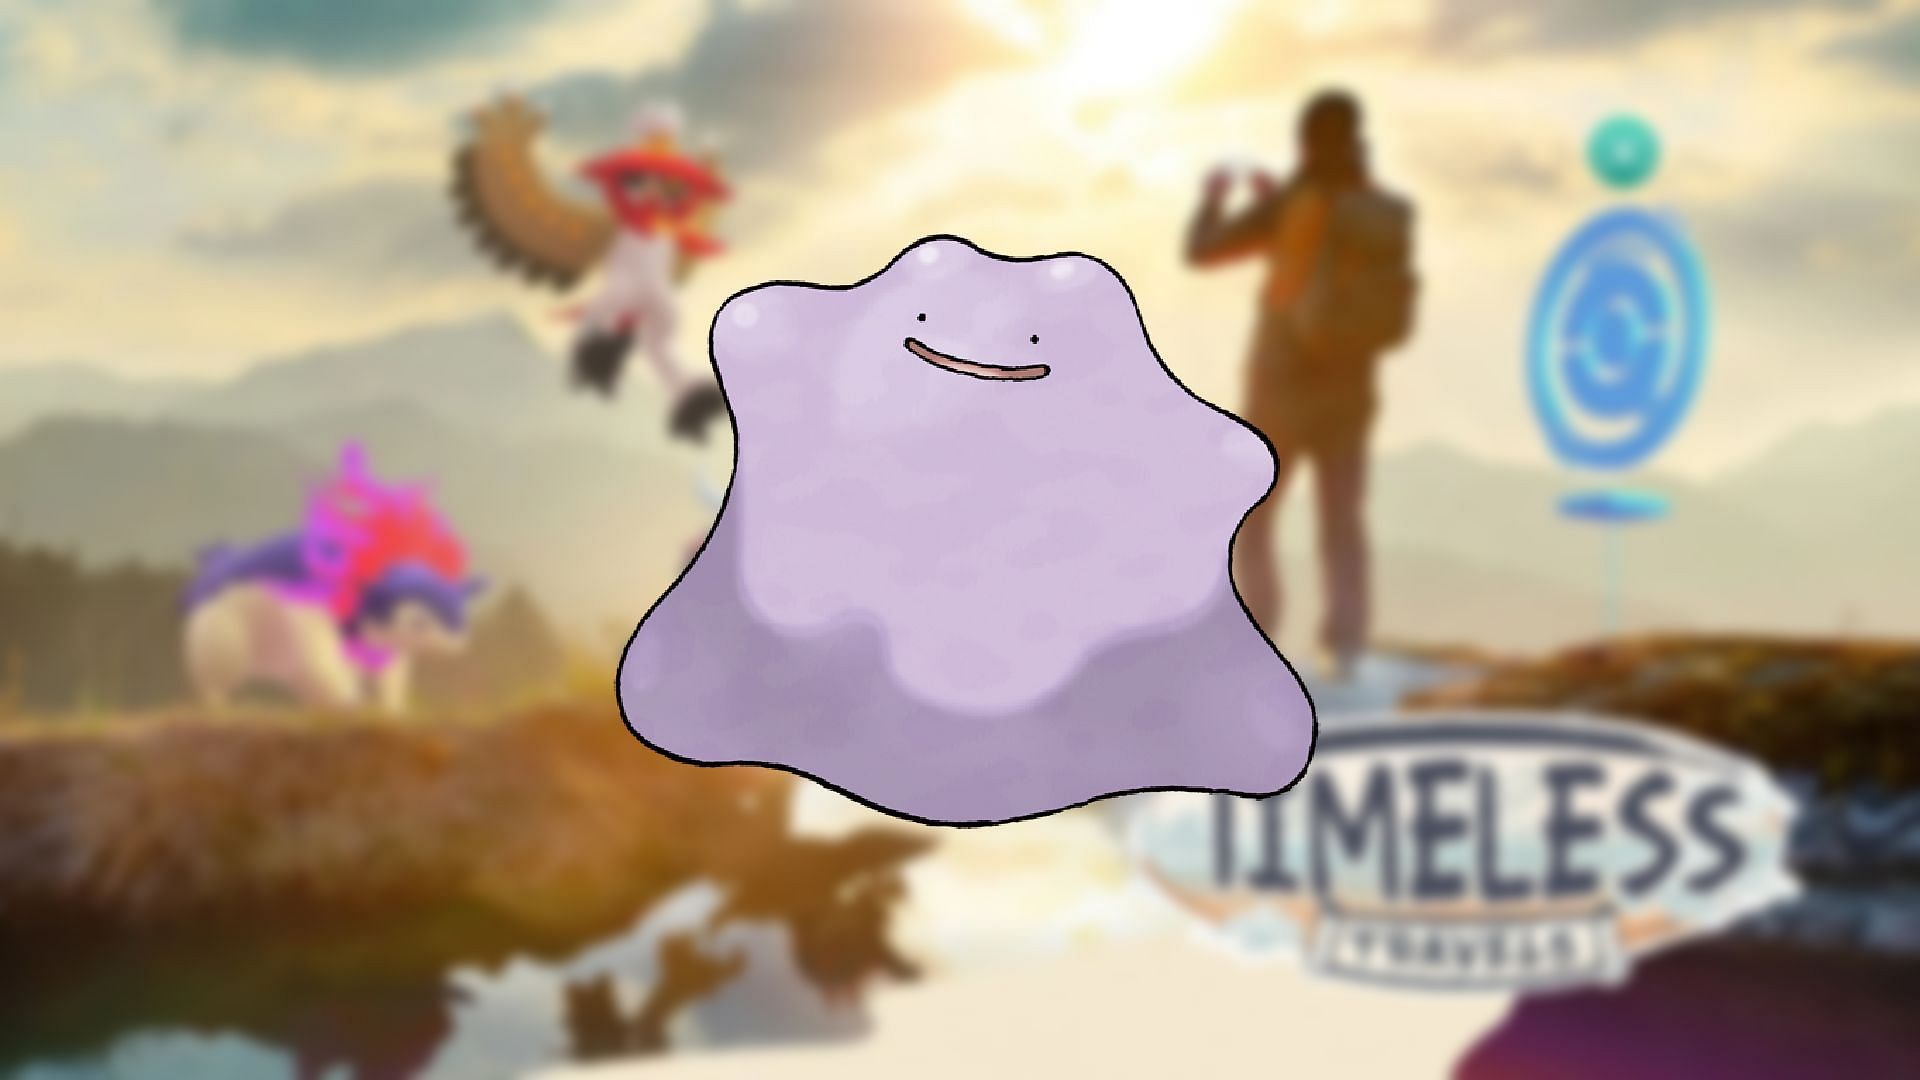 Ditto disguises October 2023 Pokémon Go! How to catch ditto in Pokémon Go  FULL Ditto disguises! 